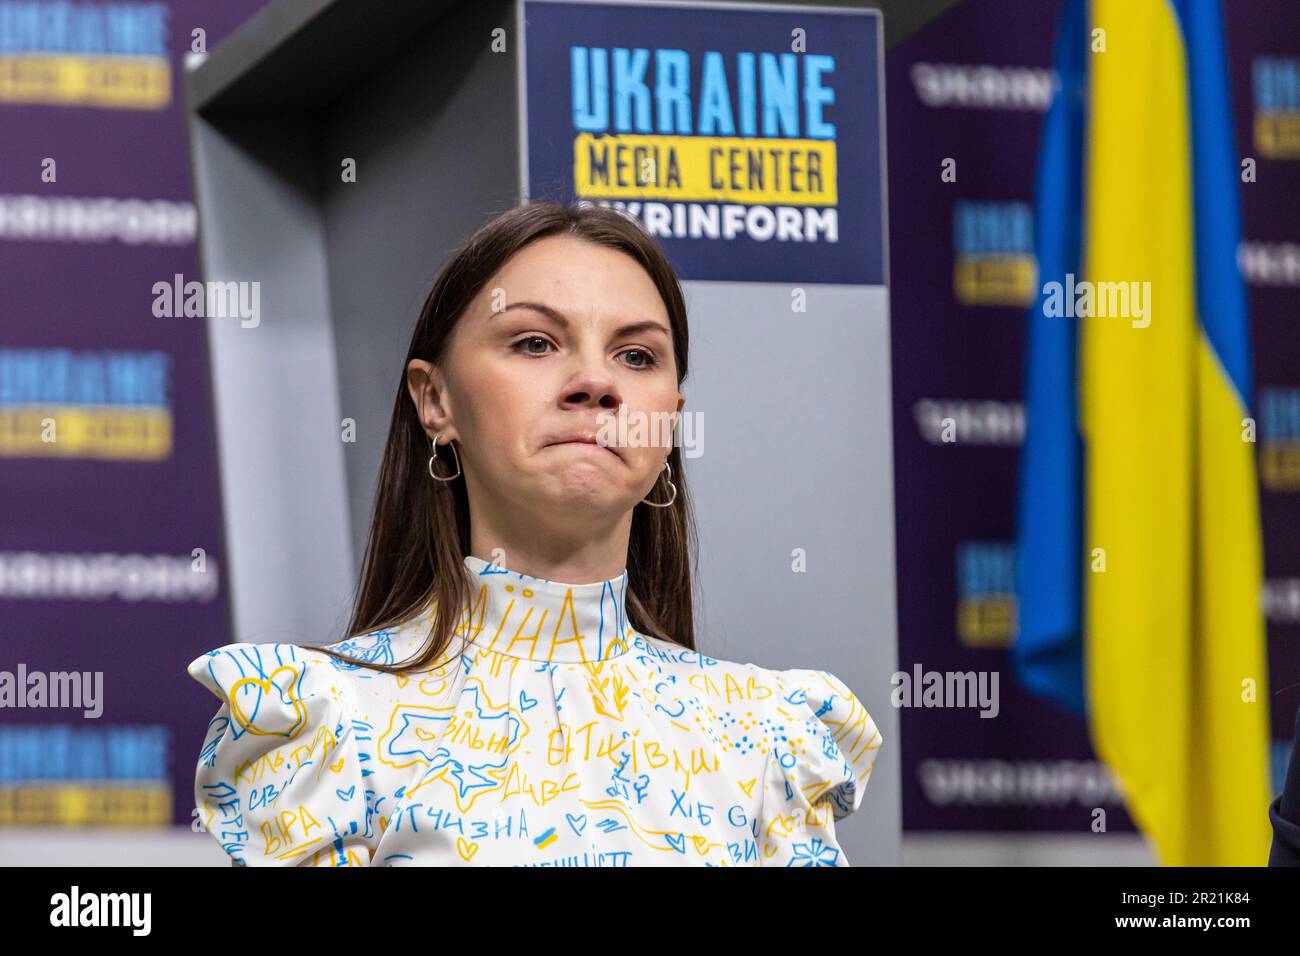 Sofiia Cherepanova, sister of a captured Azovstal defender attends at the press conference in Ukrainian Media Centre Ukrinform. Ukrinform - Ukrainian information agency - hosts a press conference entitled “A year of leaving Azovstal steelworks: cry out, as it's impossible to be silent” by representatives of Women of Steel NGO. Women of Steel is a Ukrainian NGO that gathers mothers, wives and other members of families of Azovstal defenders. Azovstal fighters were sent to Russian prison on May 16, 2022, exactly a year ago. Members of their families say that since then there is no contact with th Stock Photo